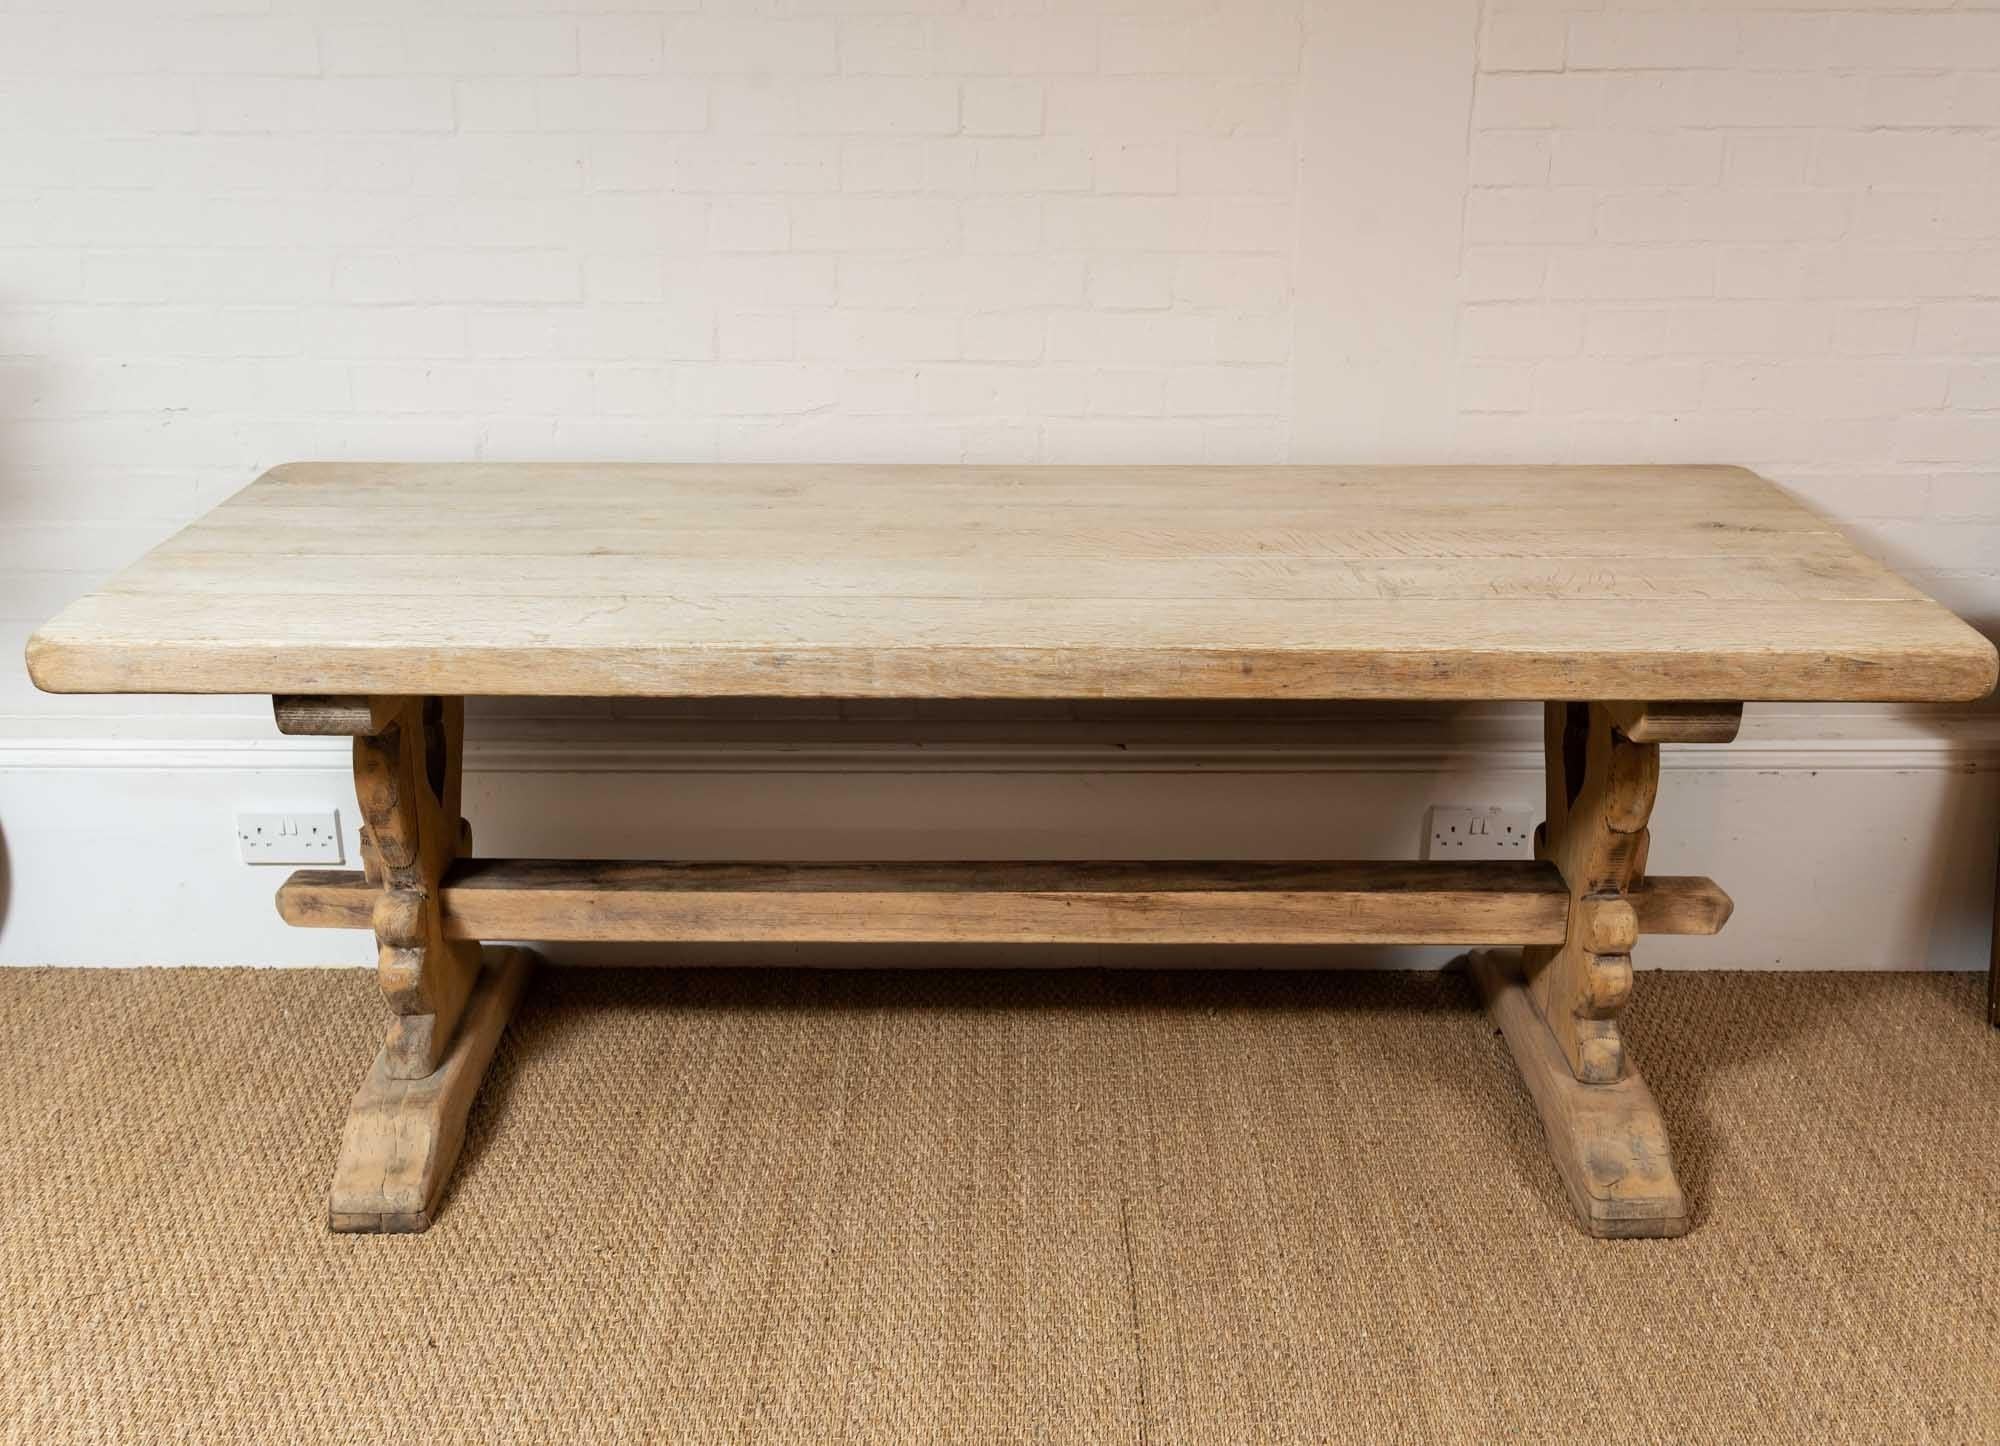 Perfect for a country kitchen this 1920s French refectory table has an earlier look and feel to it. Made from Oak it has a deep-planked top and central stretcher between the two legs making it a very comfortable table to sit at and perfect for a